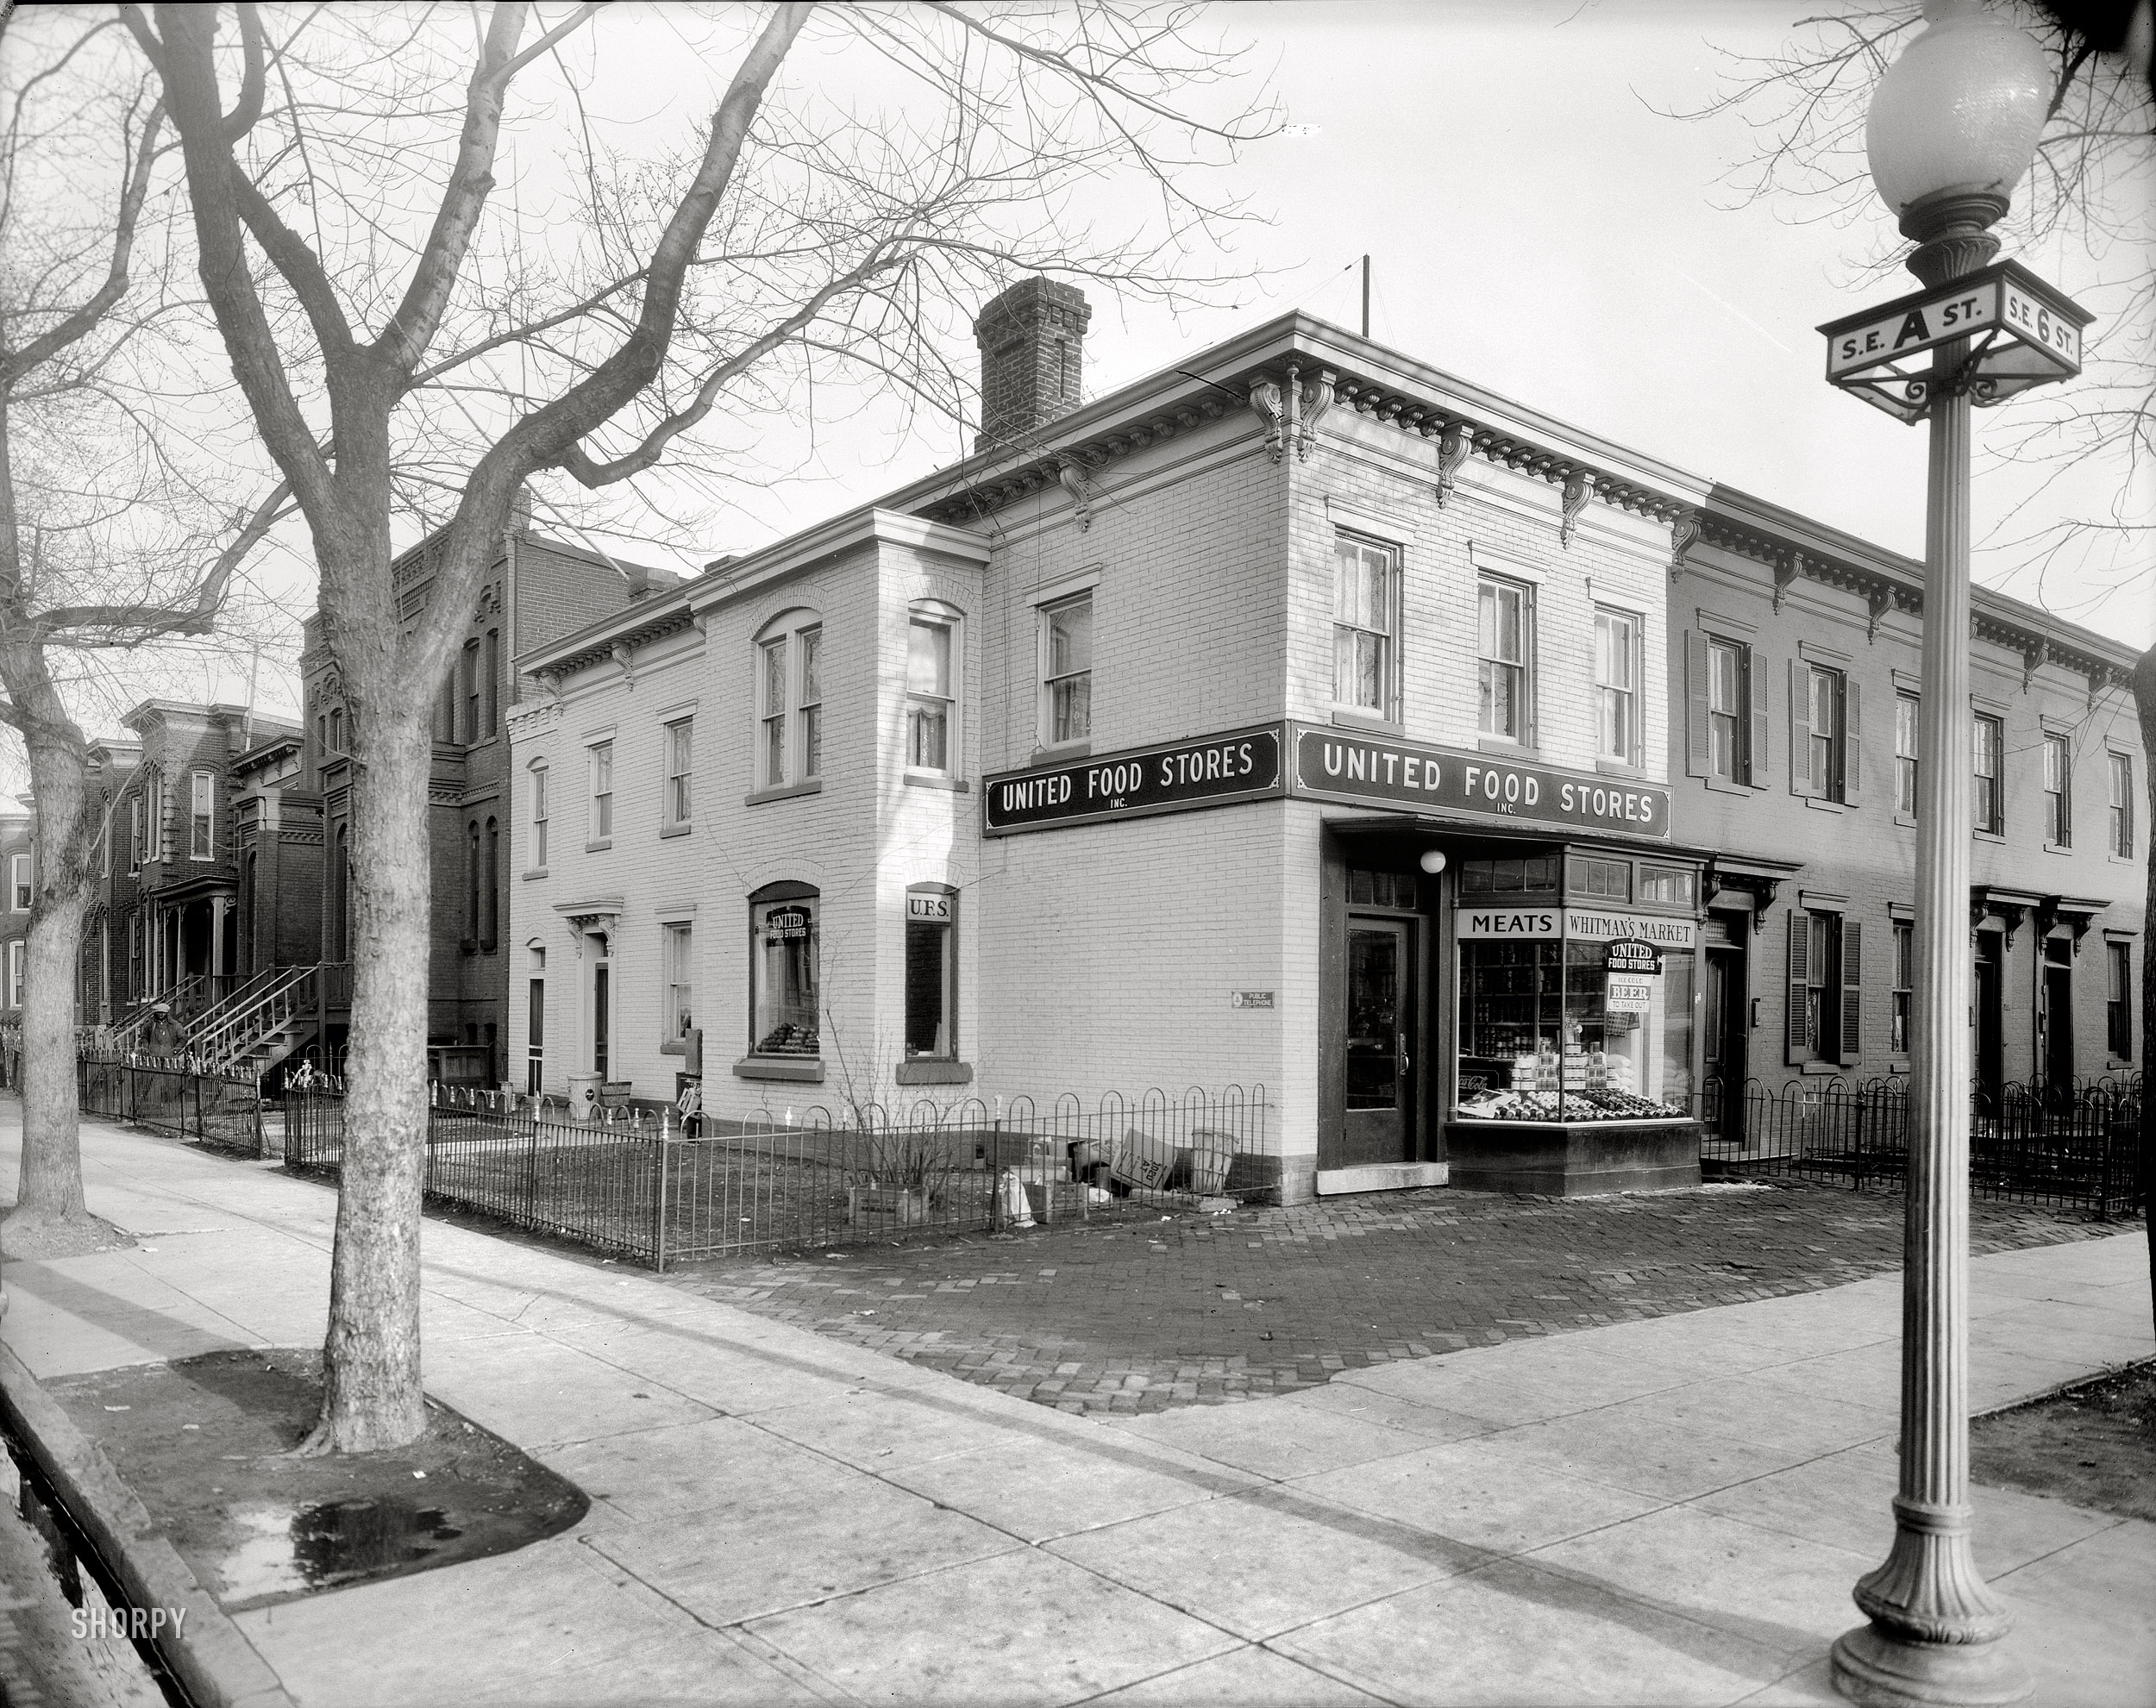 Circa 1932. "United Food Stores." Whitman's Market at A and Sixth streets S.E. in Washington. National Photo Company safety film negative. View full size.